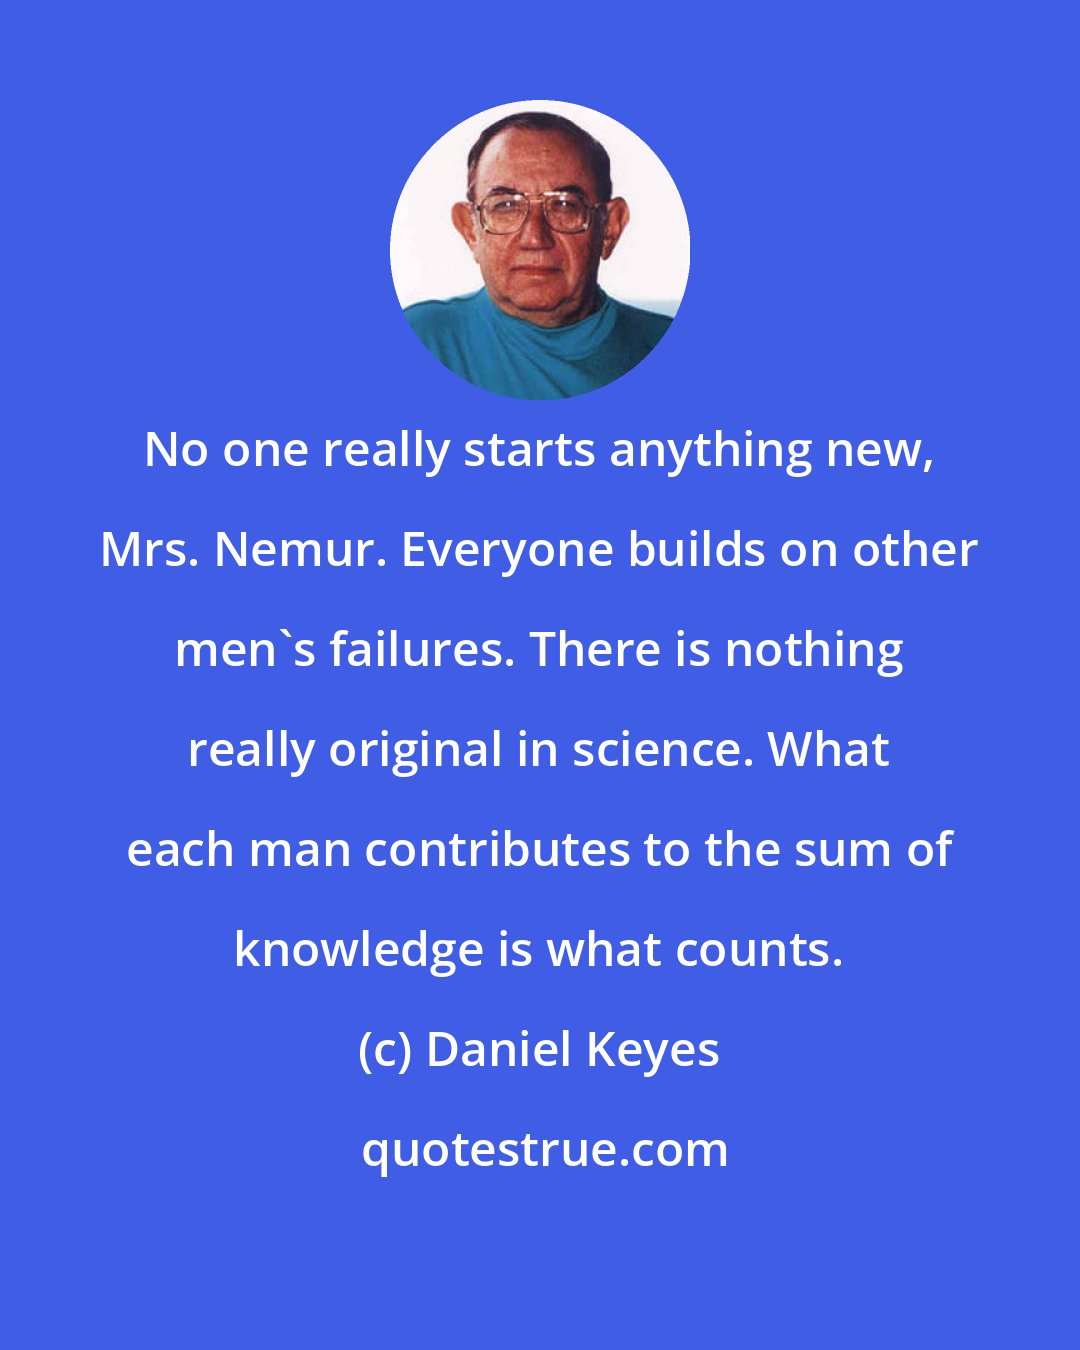 Daniel Keyes: No one really starts anything new, Mrs. Nemur. Everyone builds on other men's failures. There is nothing really original in science. What each man contributes to the sum of knowledge is what counts.